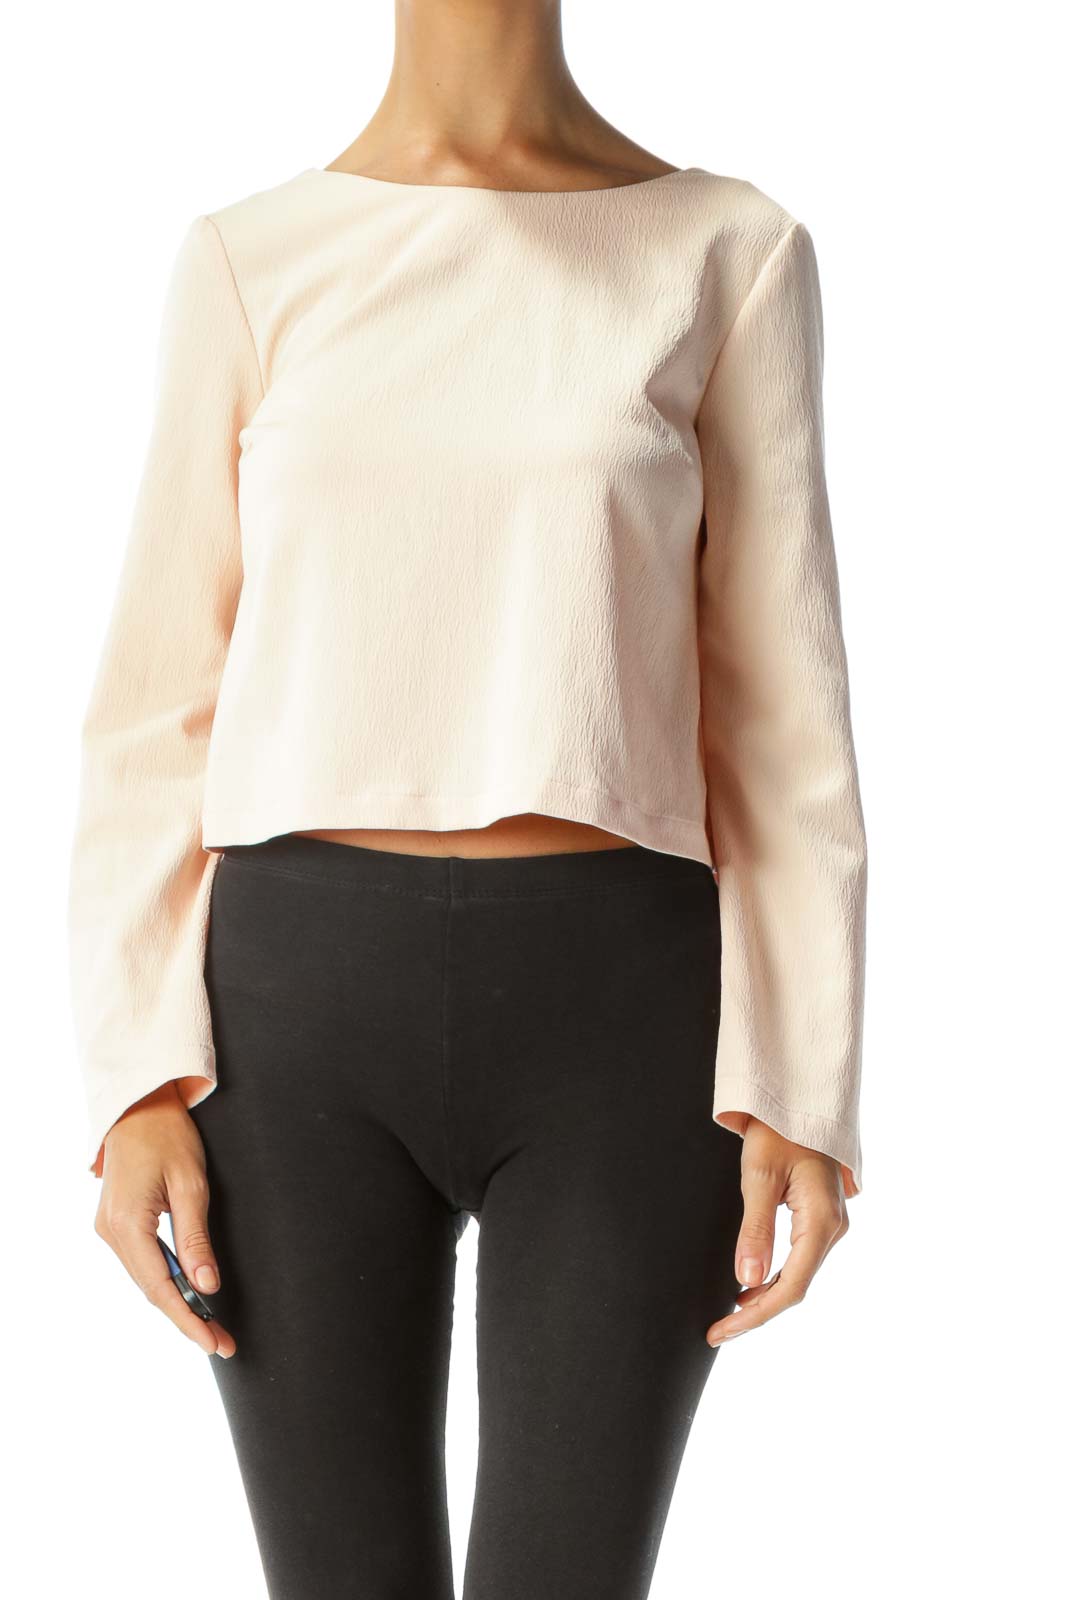 Blush Bell-Sleeve Open-Back Cropped Blouse Front